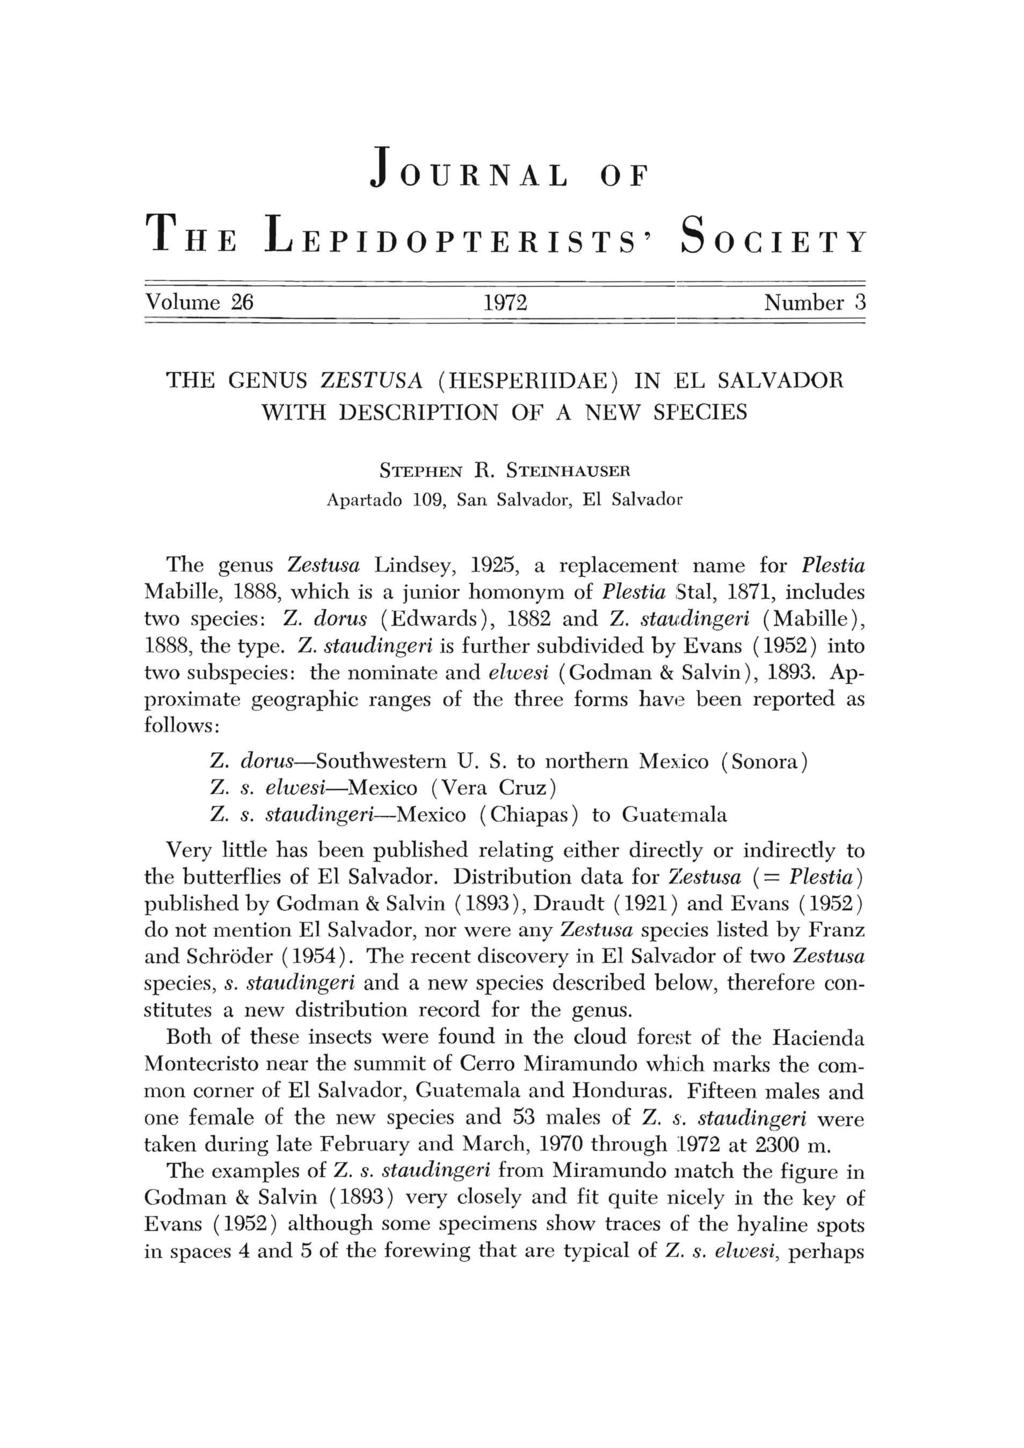 JOURNAL OF THE LEPIDOPTERISTS' SOCIETY Volume 26 1972 Number 3 THE GENUS ZESTUSA (HESPERIIDAE) IN EL SALVADOR WITH DESCRIPTION OF A NEW SPECIES STEPHEN R.